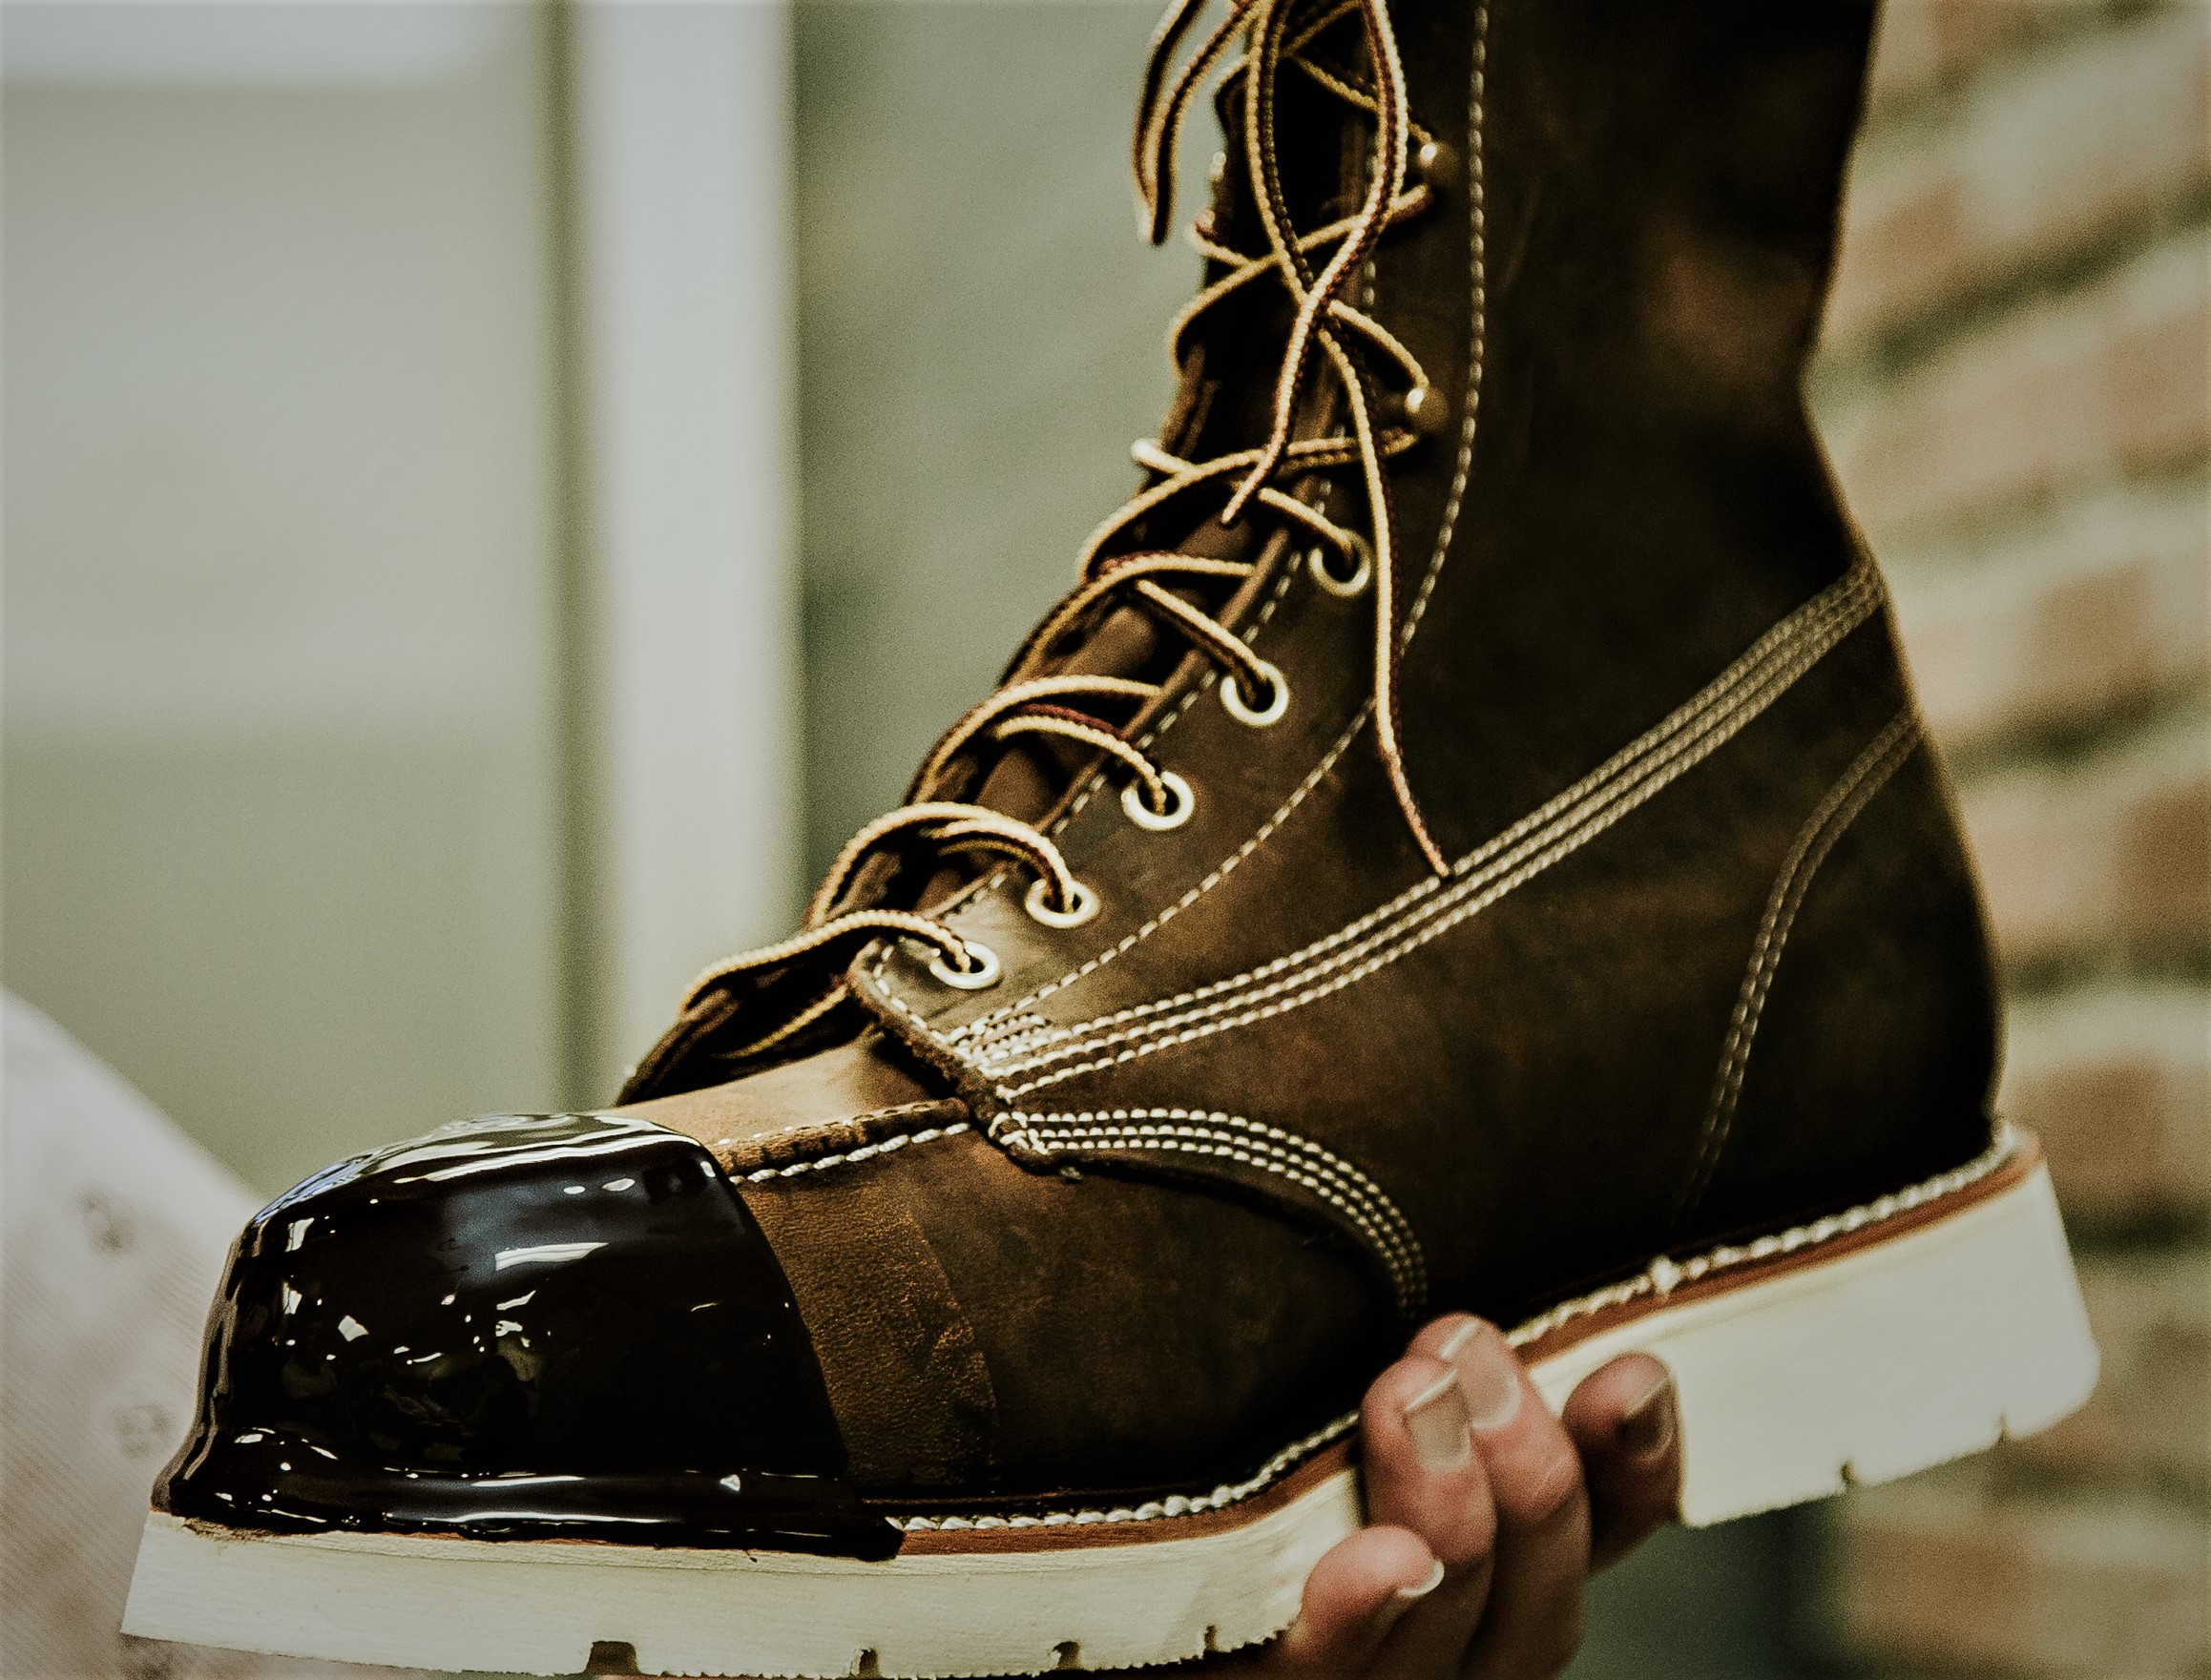 How to Apply Tuff Toe on Work Boots 